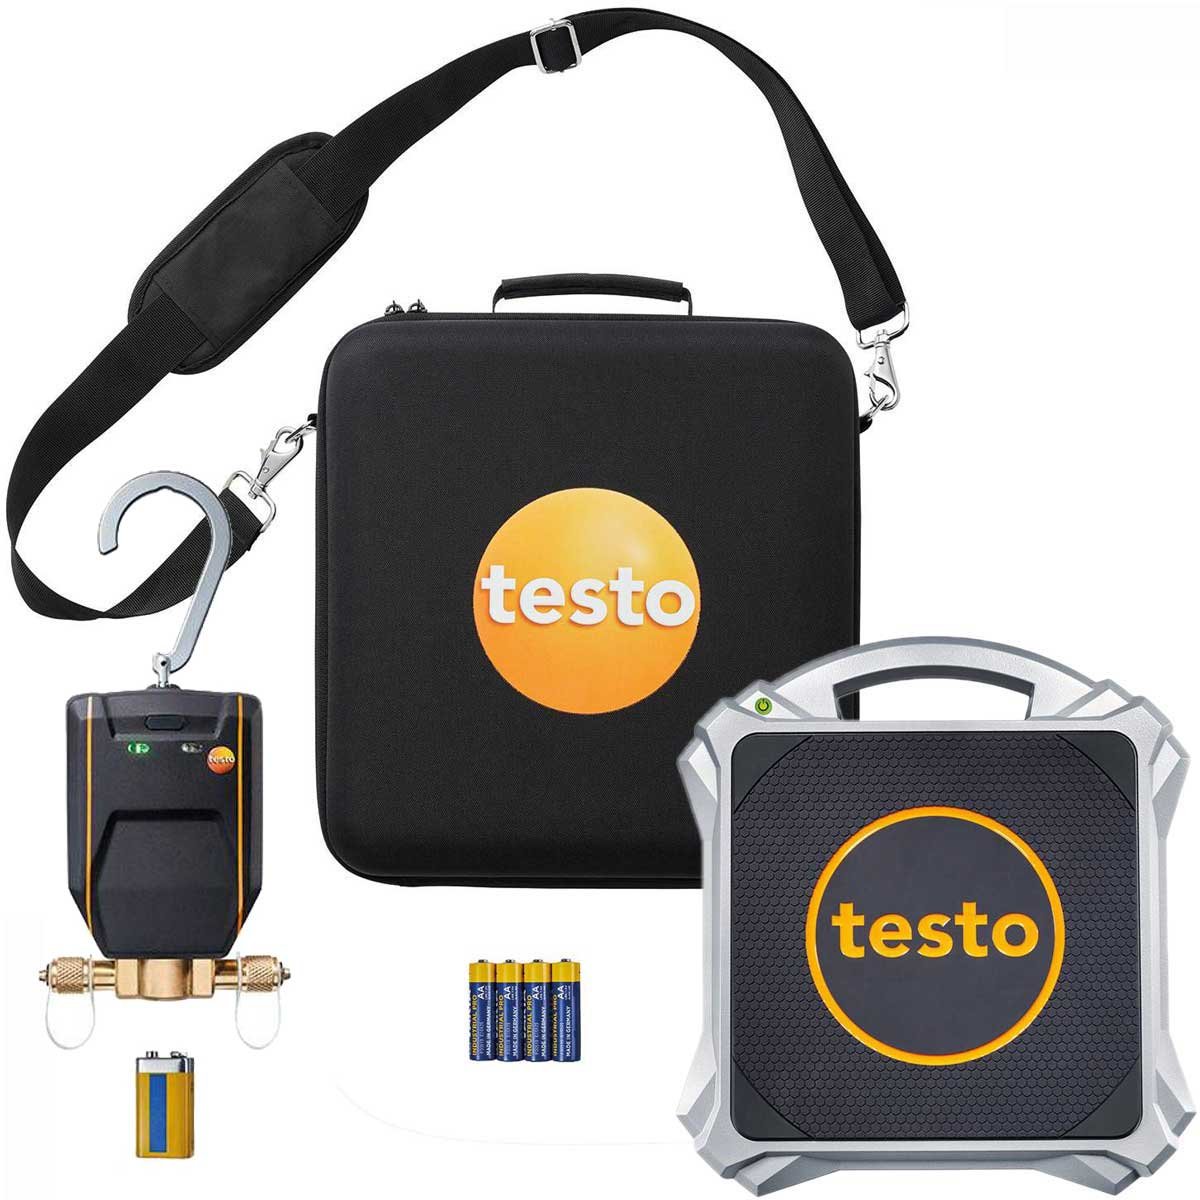 Testo 560i electronic scale kit for refrigeration gas and Smart solenoid valve with Bluetooth 0564 2560